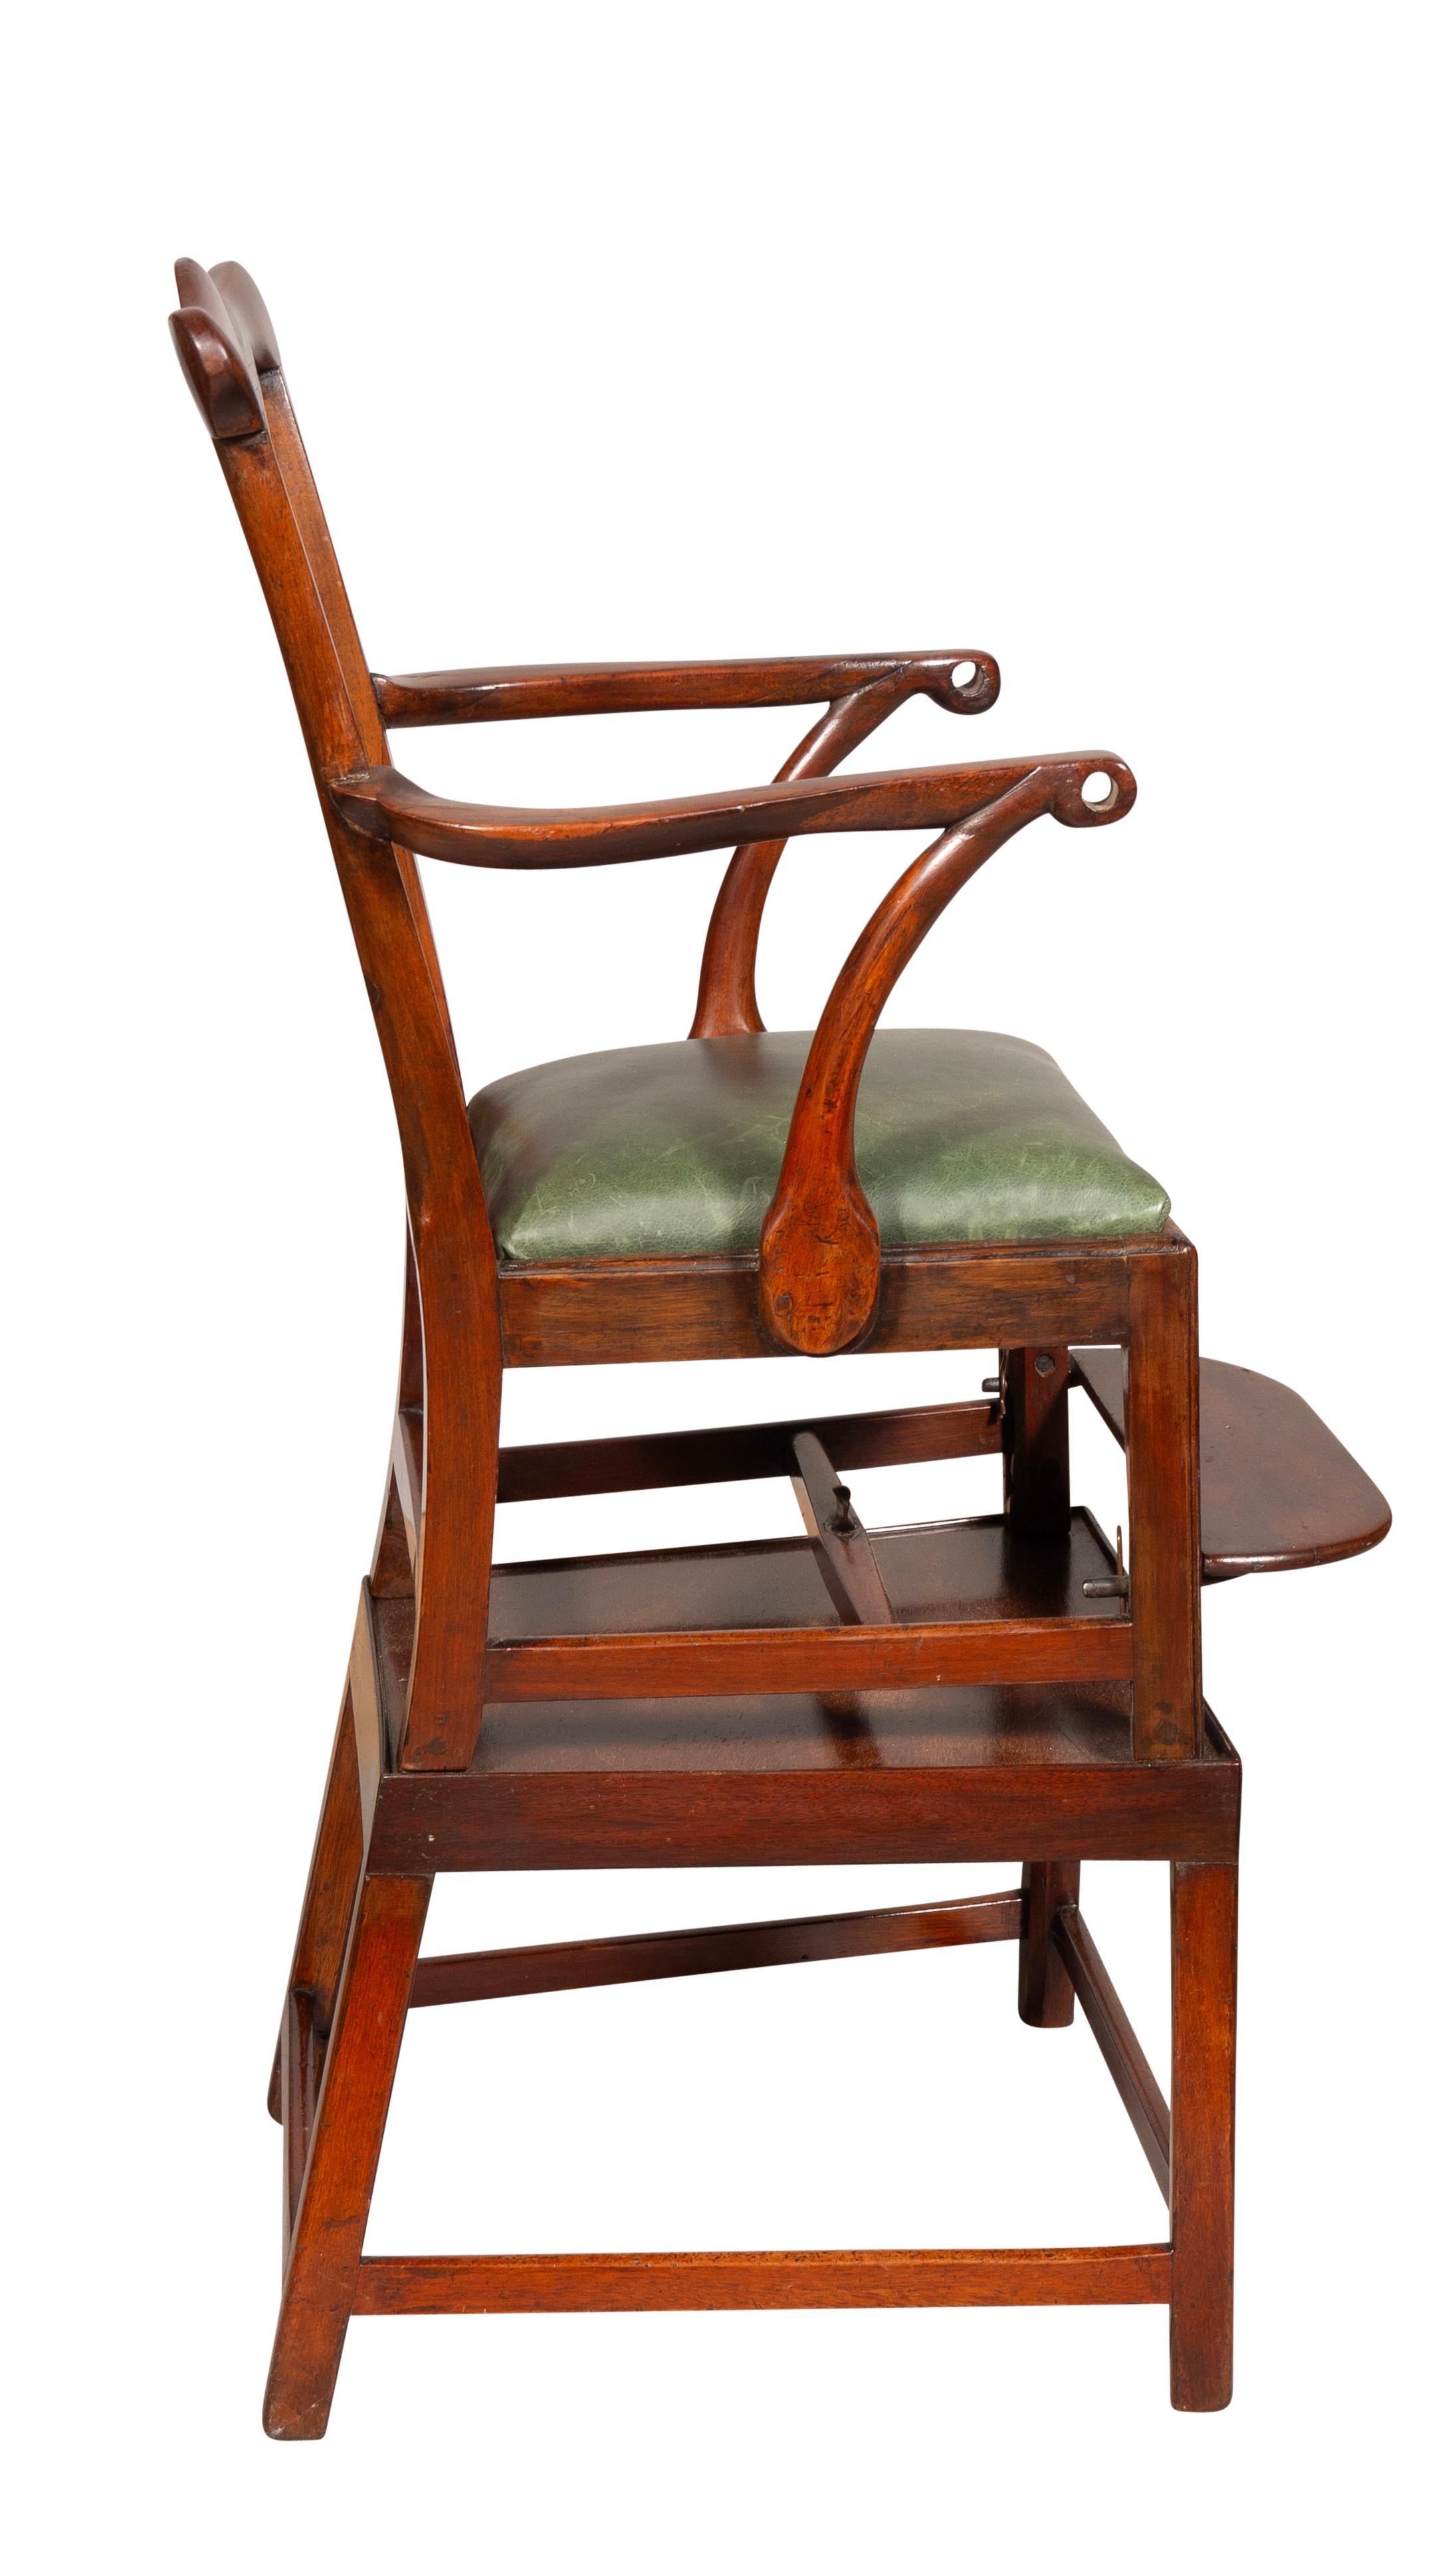 English George III Mahogany Childs High Chair For Sale